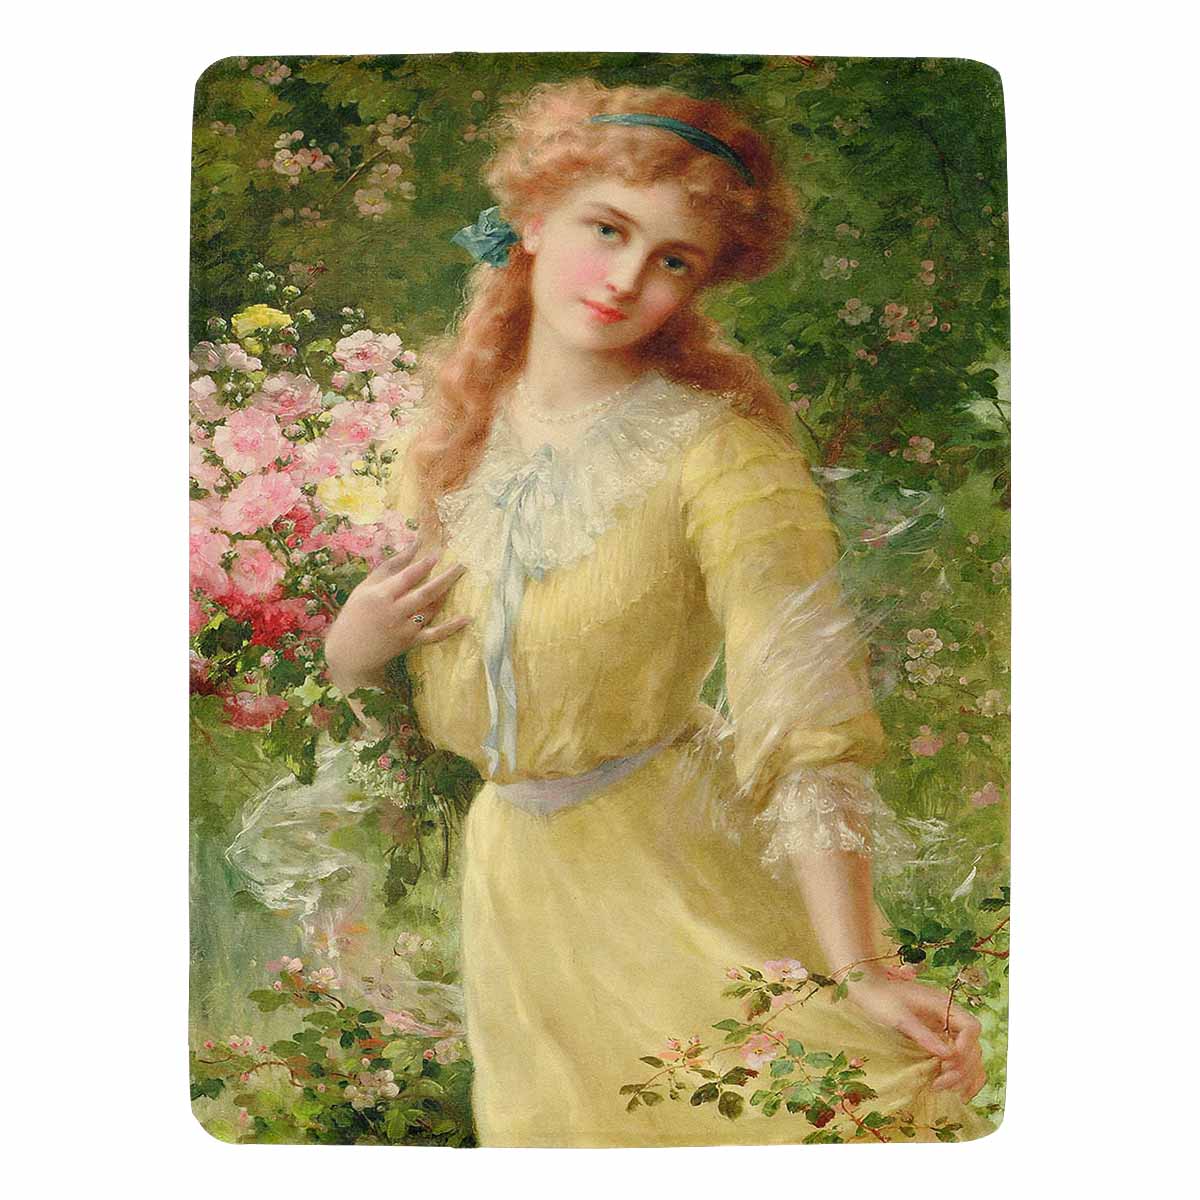 Victorian Lady Design BLANKET, LARGE 60 in x 80 in, Portrait Of A Girl